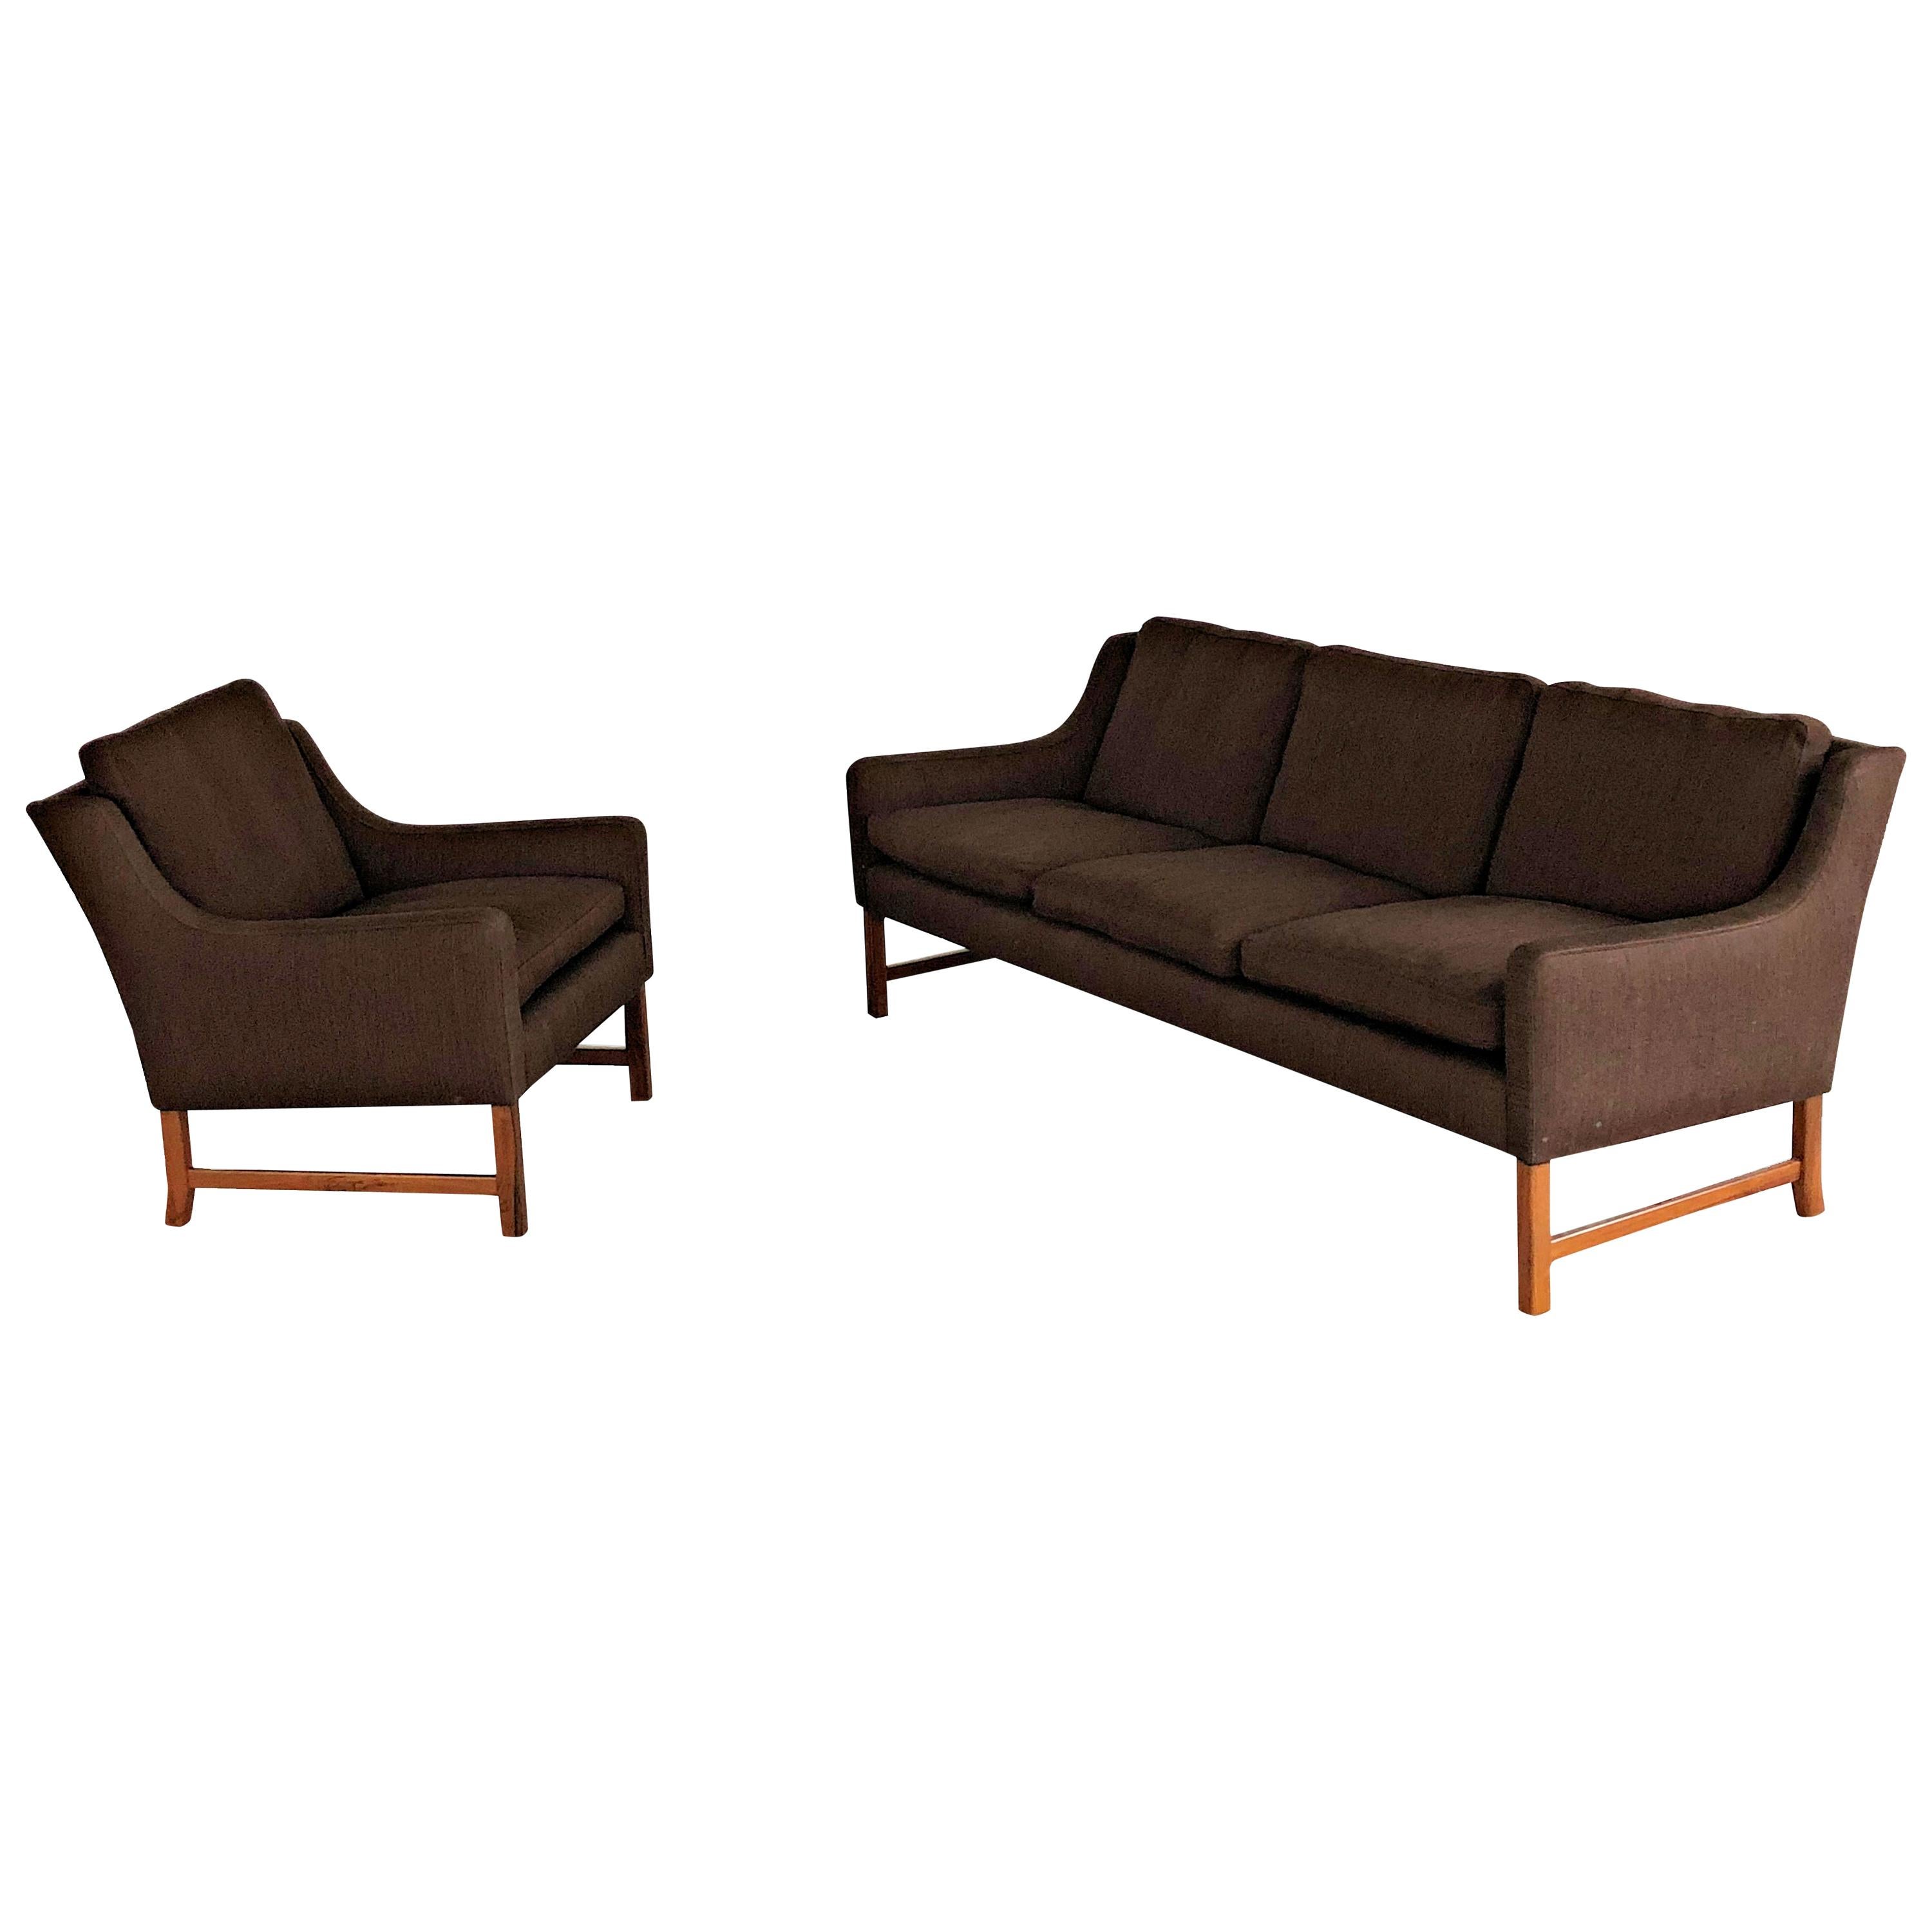 1960s Fredrik Kayser Rosewood Sofa and Lounge Chair by Vatne